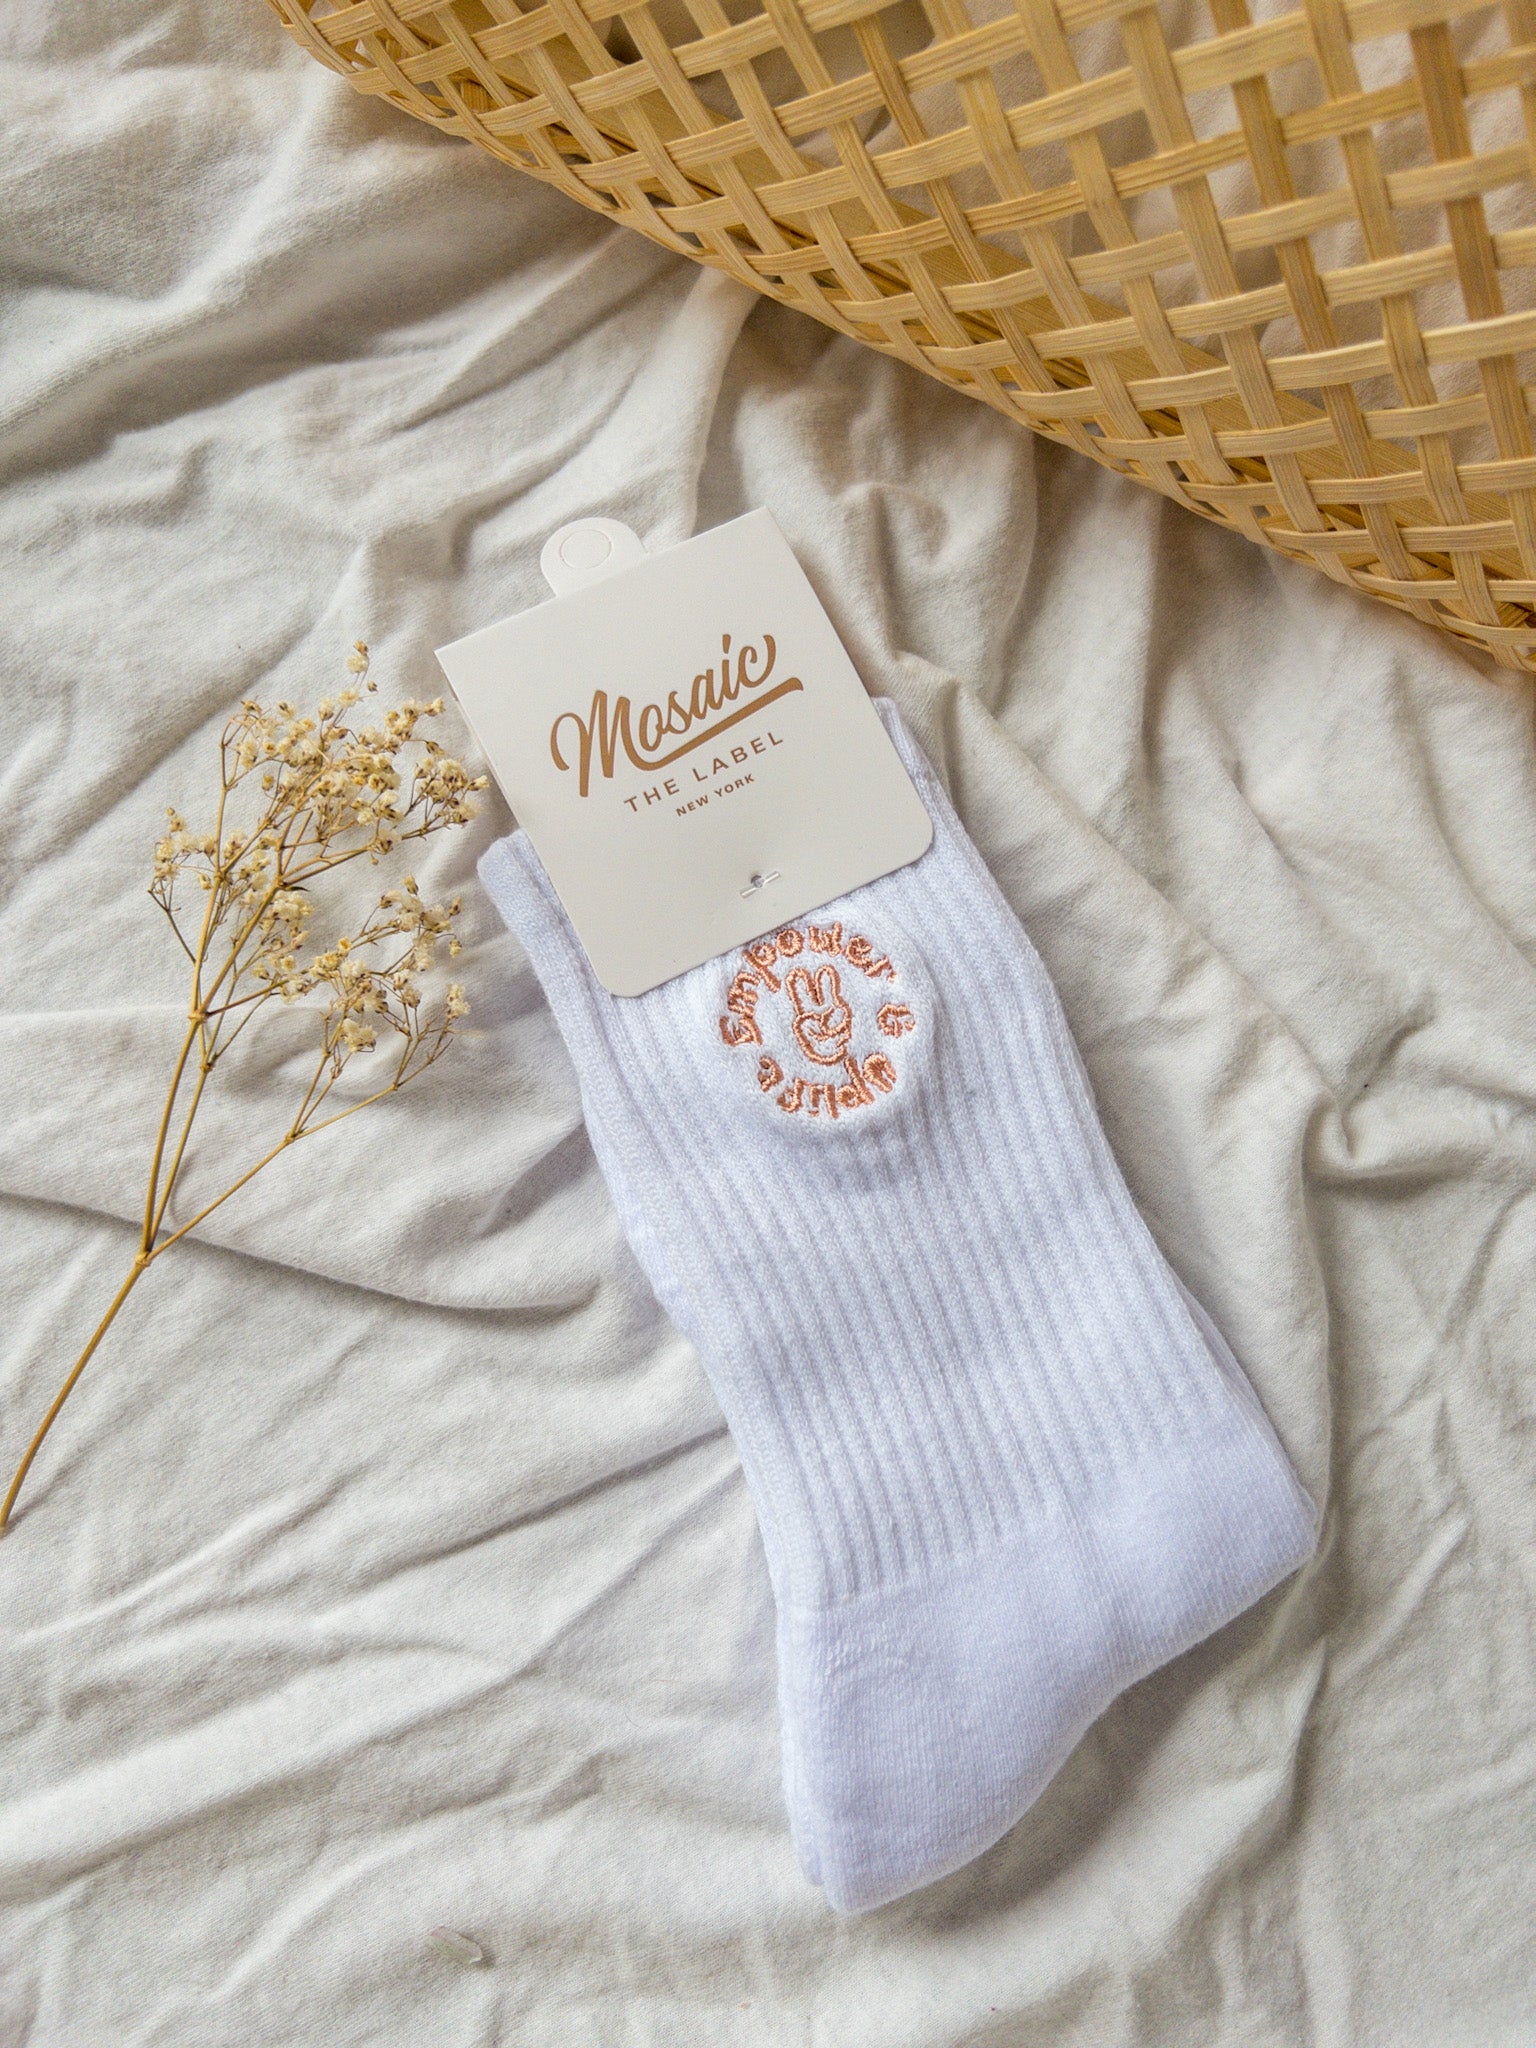 Embroidered Empower & Uplift Crew Socks | Mosaic The Label